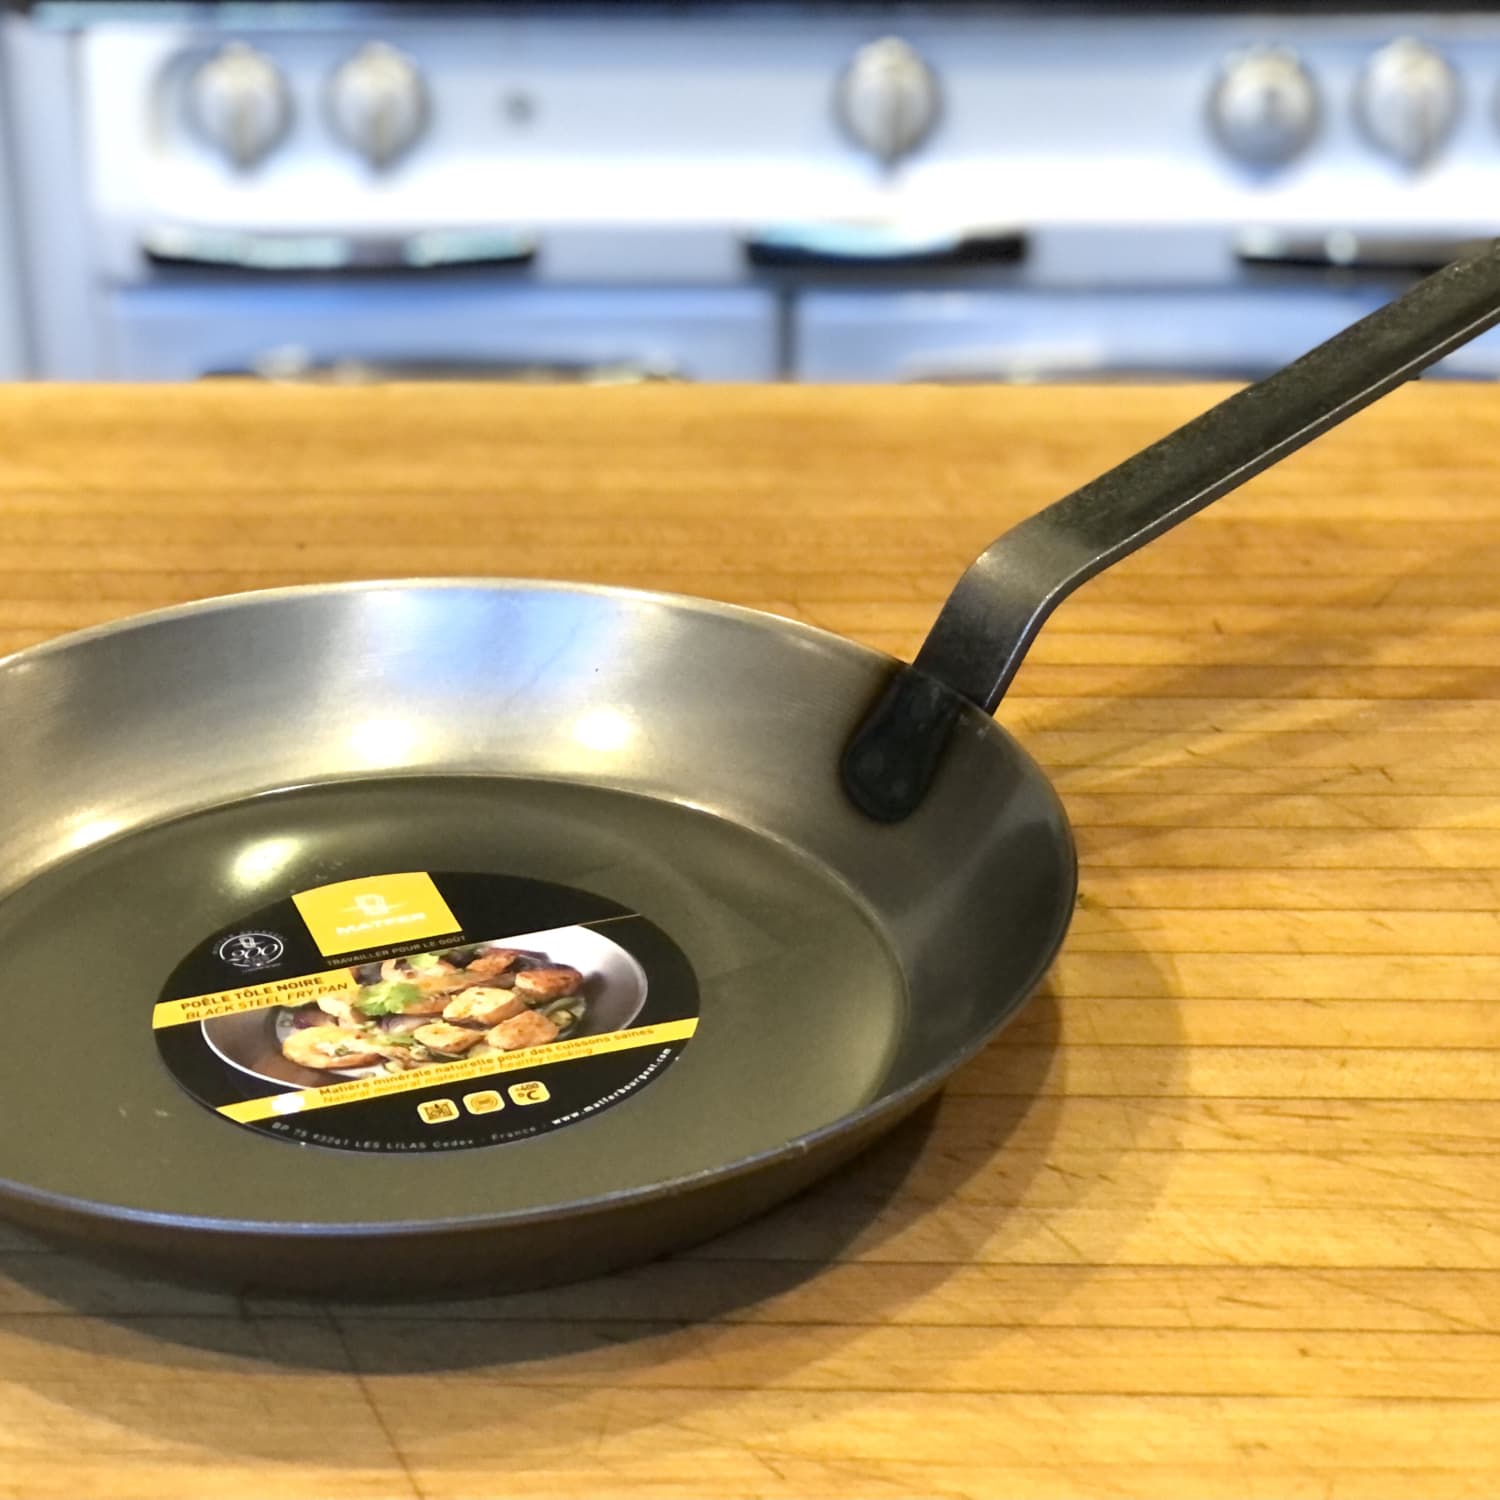 Review: Why Michelin Star Kitchens Use Made In Carbon Steel Pans